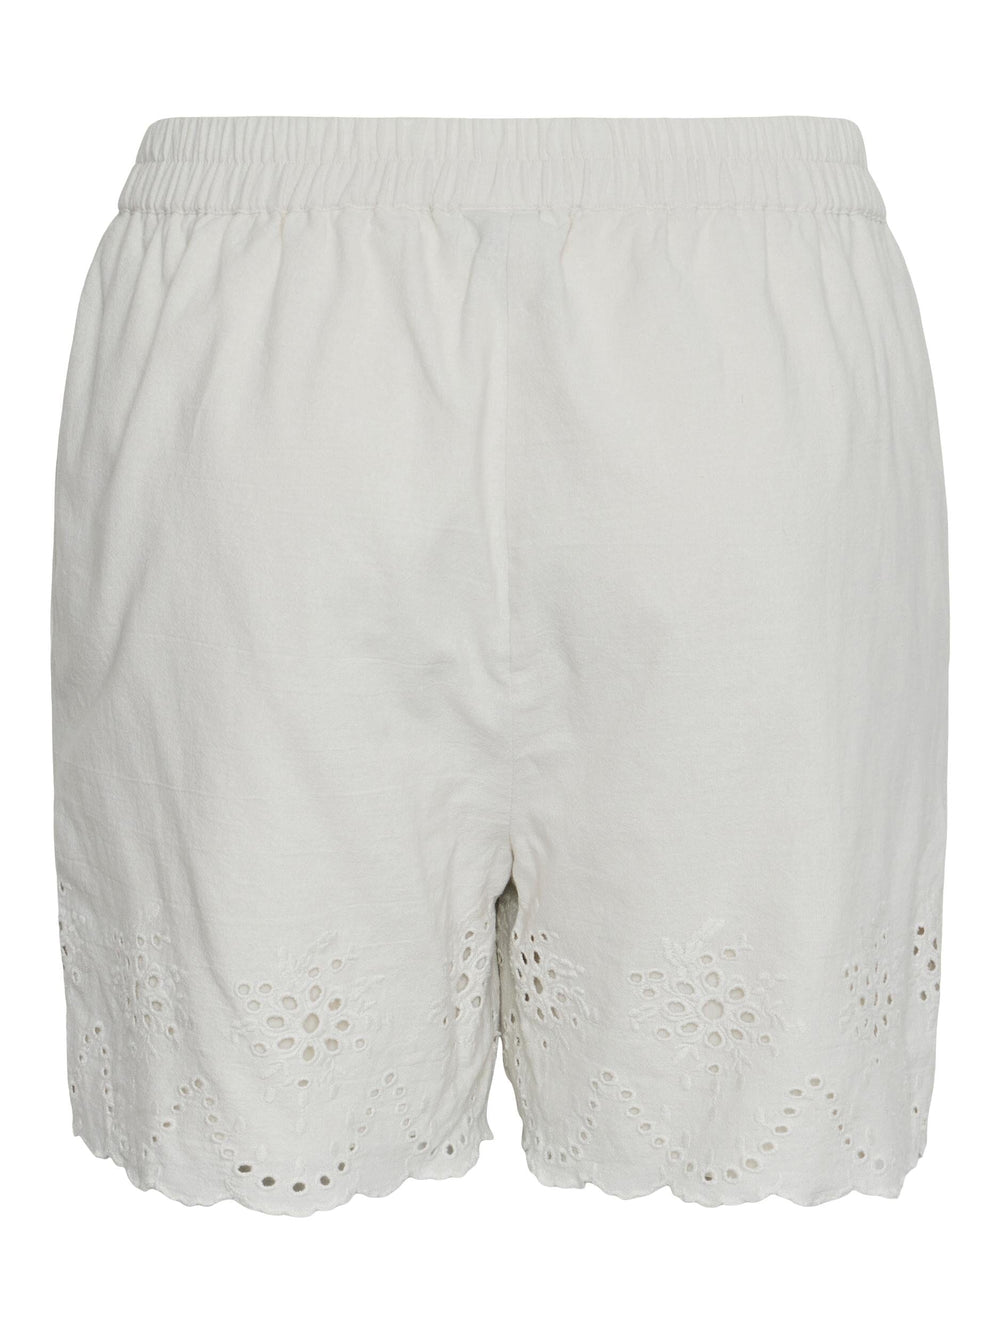 Pieces - Pcalmina Embroidery Shorts - 4486666 Birch Shorts 